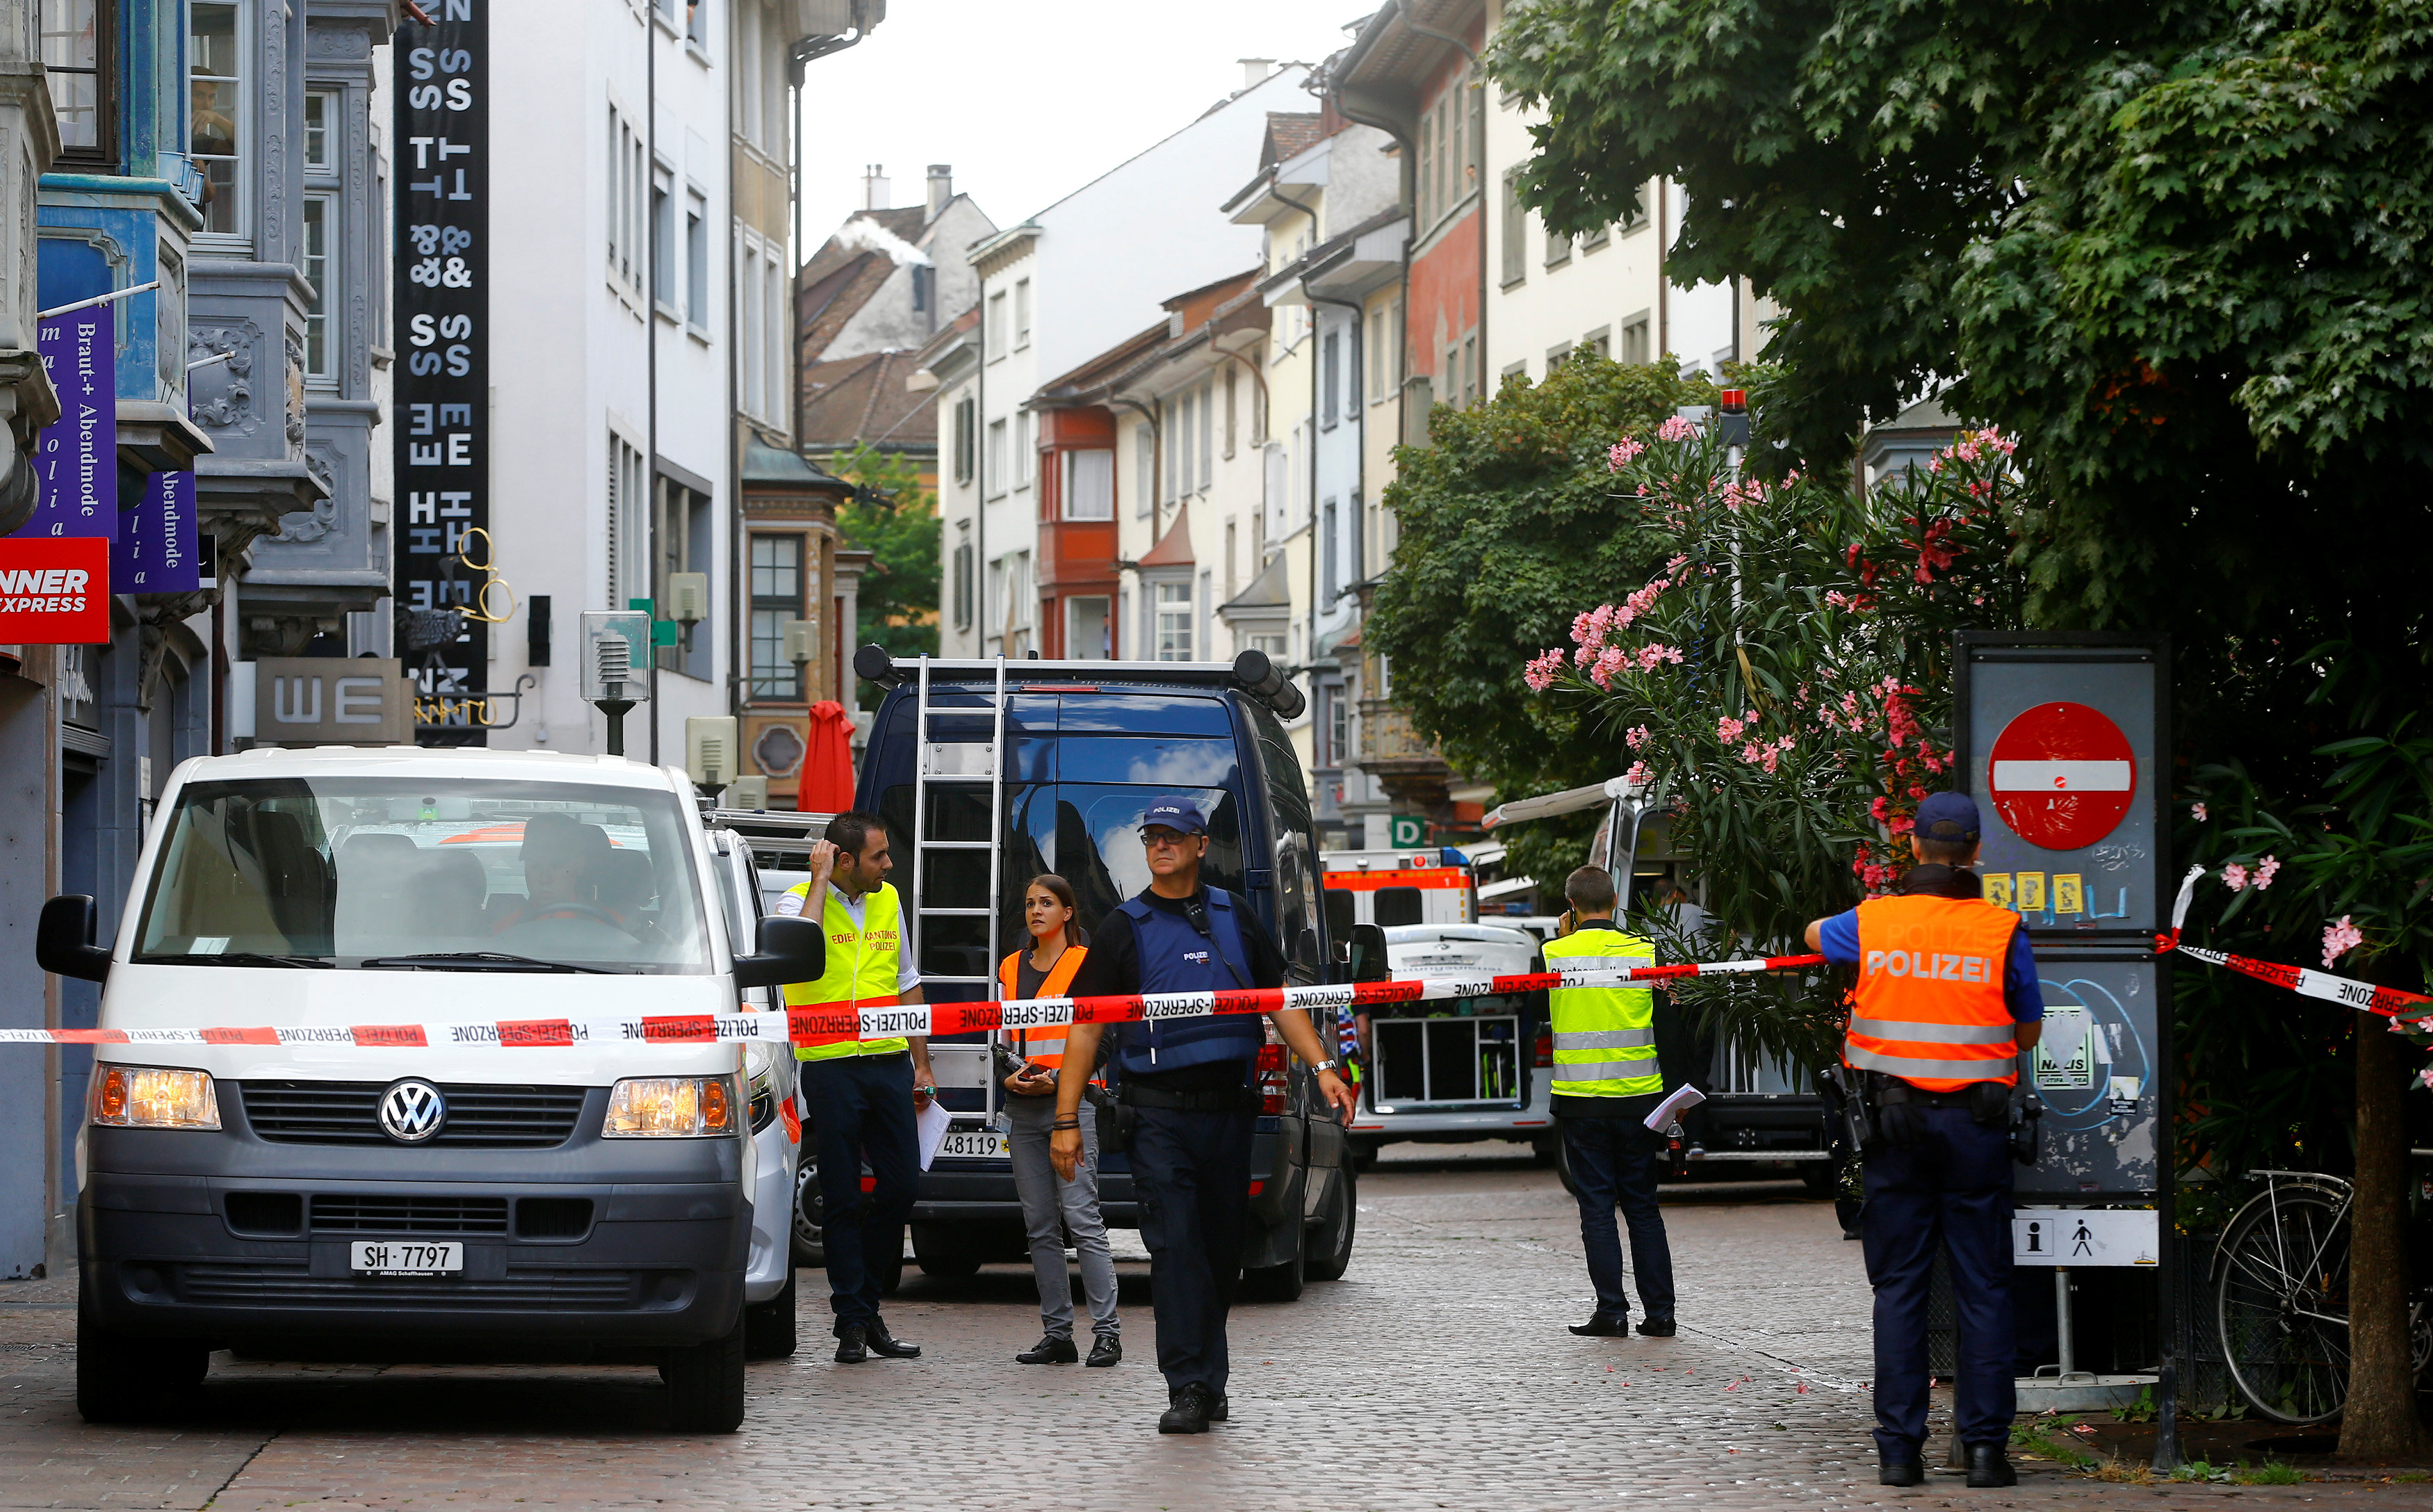 Chainsaw attacker injures five in Swiss town